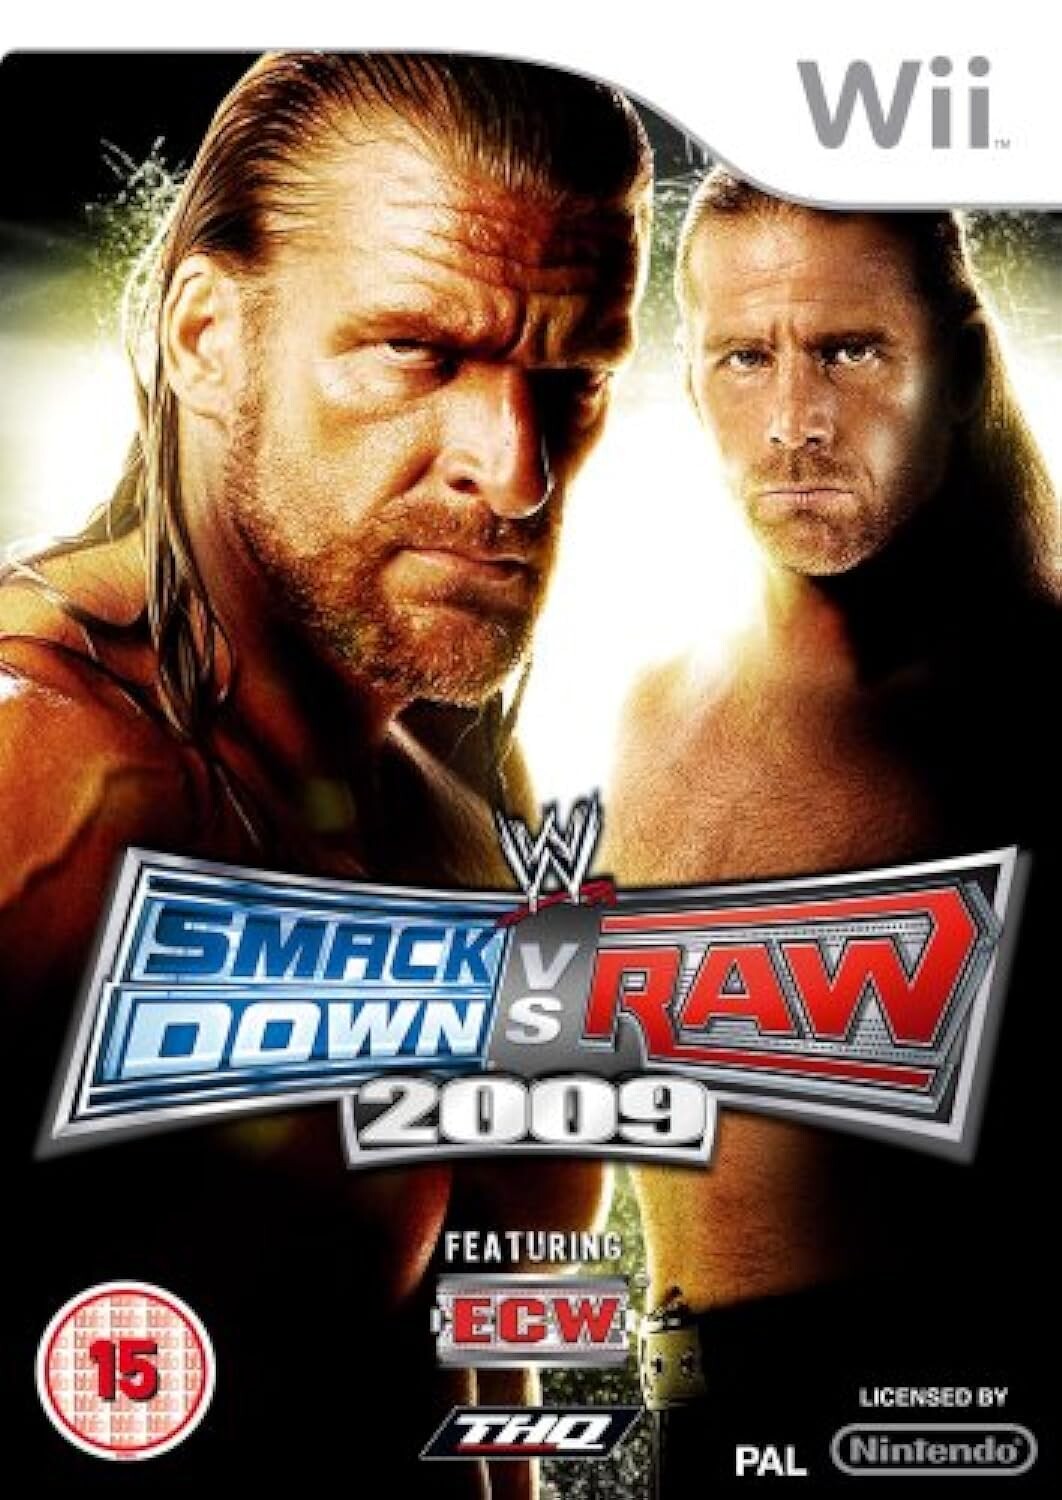 WWE SmackDown vs. Raw 2009 (French) - Wii Games